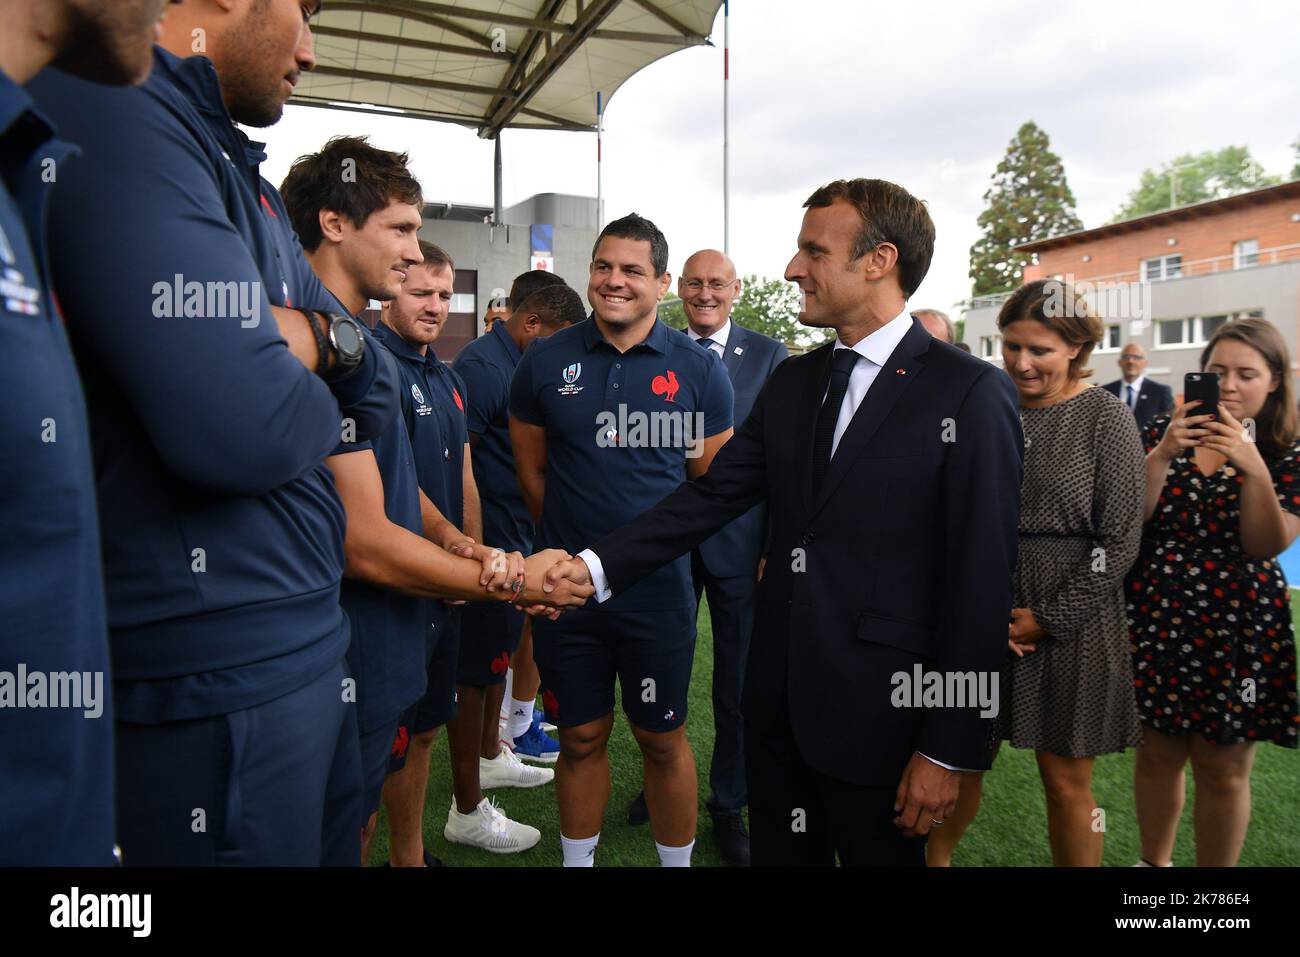 France's President Emmanuel Macron at the National Rugby Center in Marcoussis, south of Paris, on September 5, 2019. The French rugby team is preparing for the upcoming 2019 World Cup in Japan. President Macron visited ahead of the upcoming Rugby World Cup, at the National Rugby Center in Marcoussis.   Stock Photo